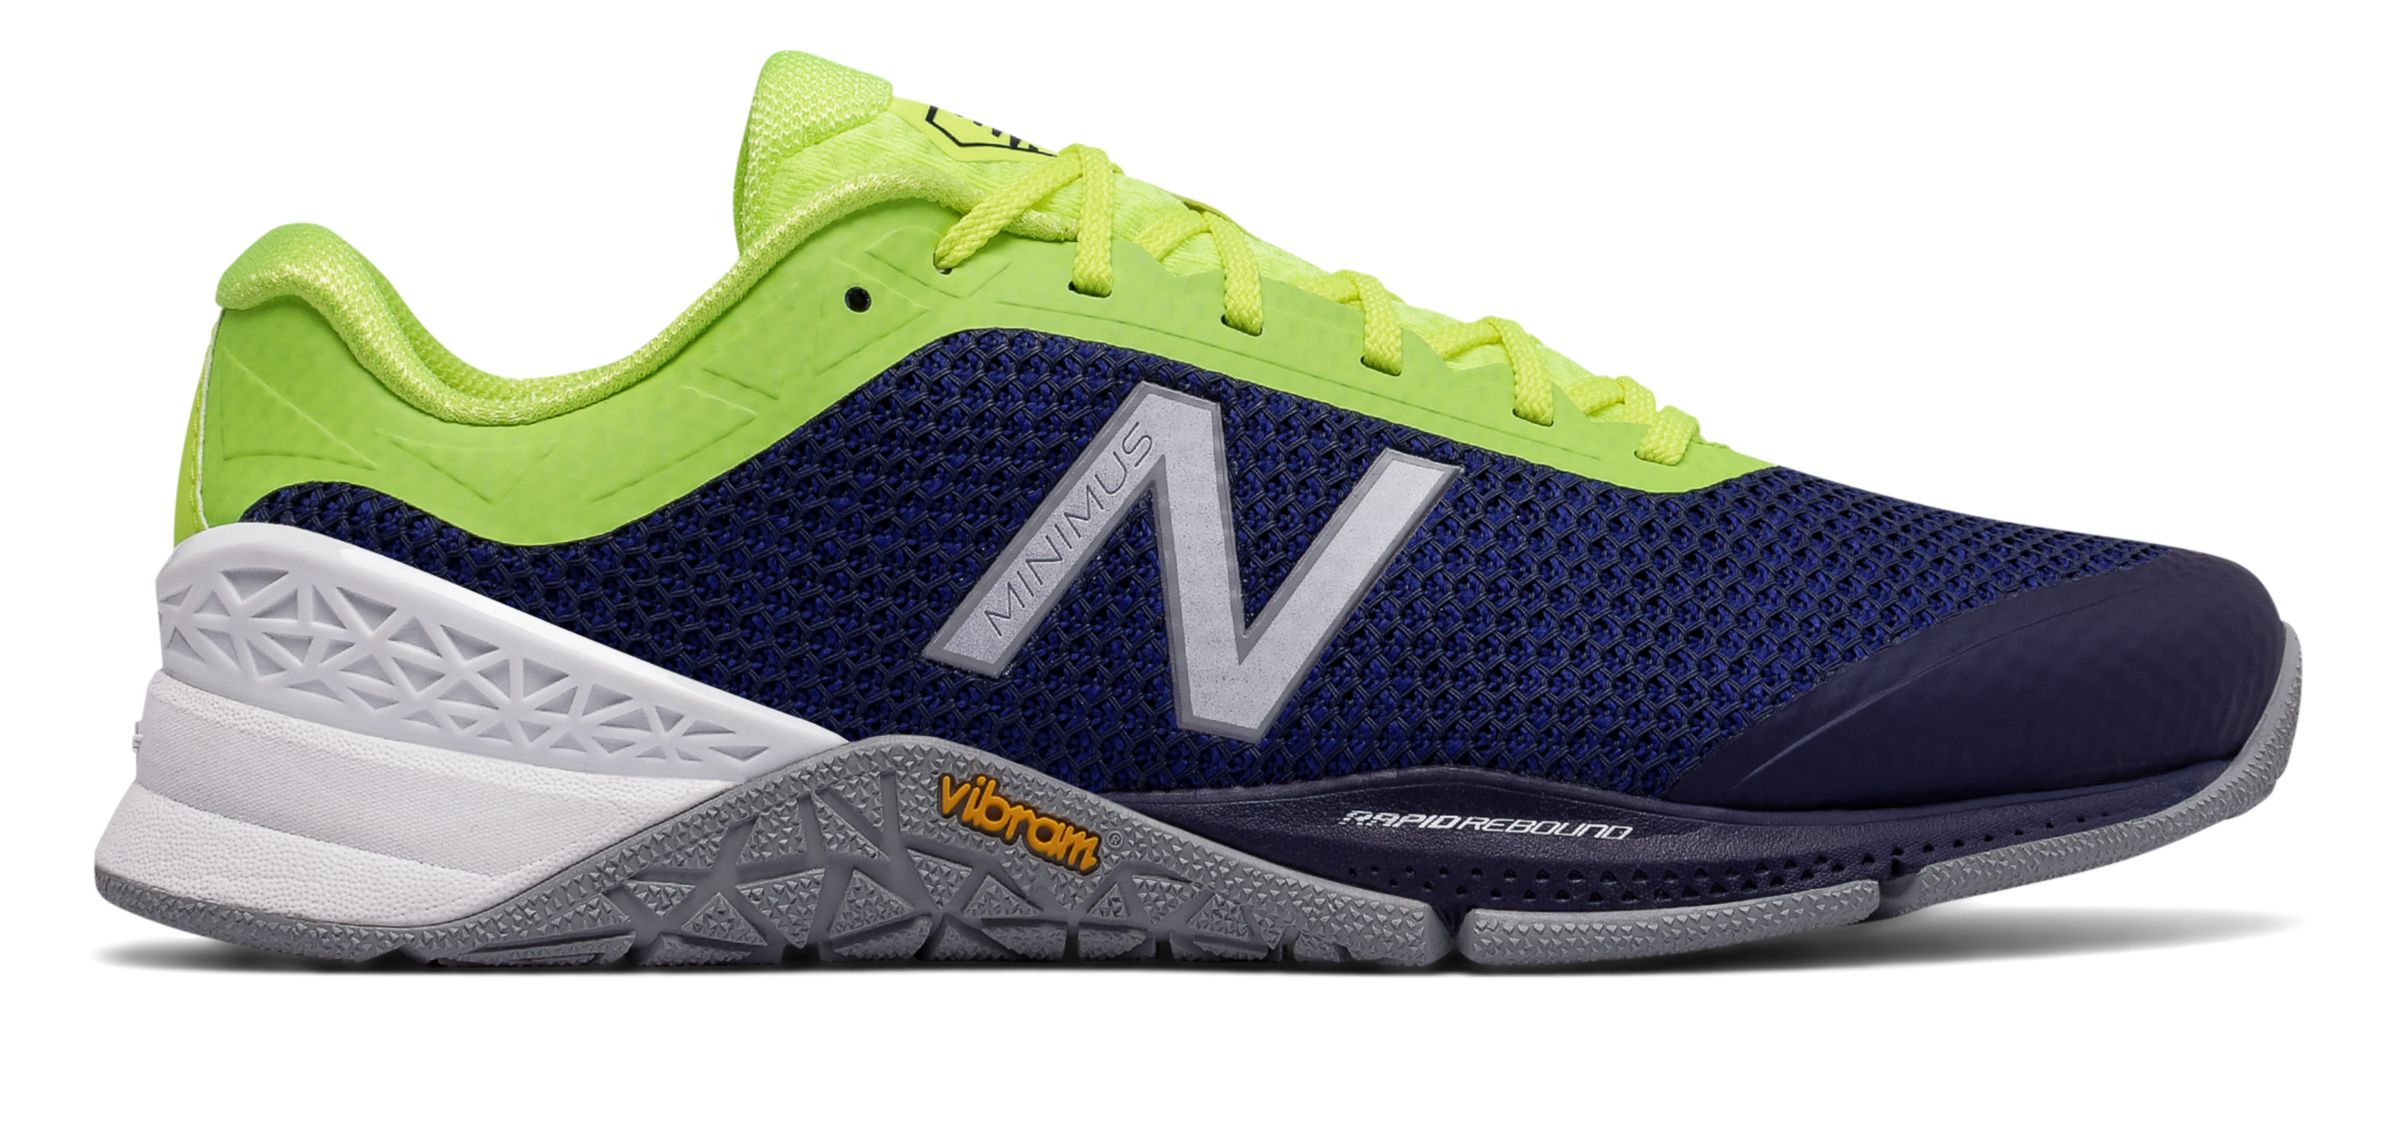 New Balance MX40-V1 on Sale - Discounts Up to 59% Off on MX40BY at Joe's New  Balance Outlet